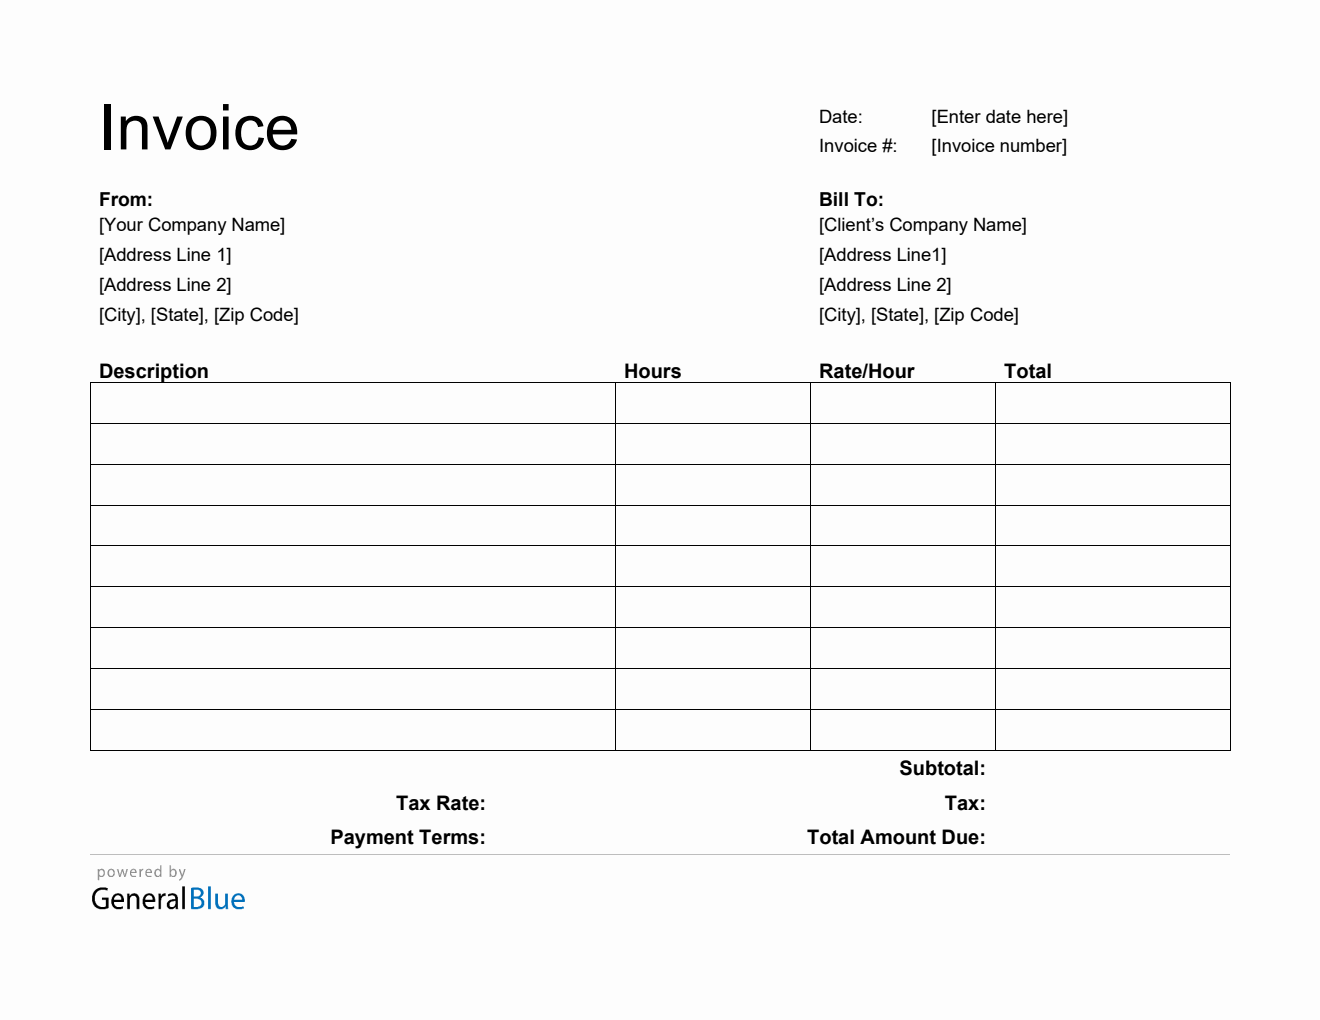 Word Invoice Template for U.S. Freelancers With Tax (Printable)